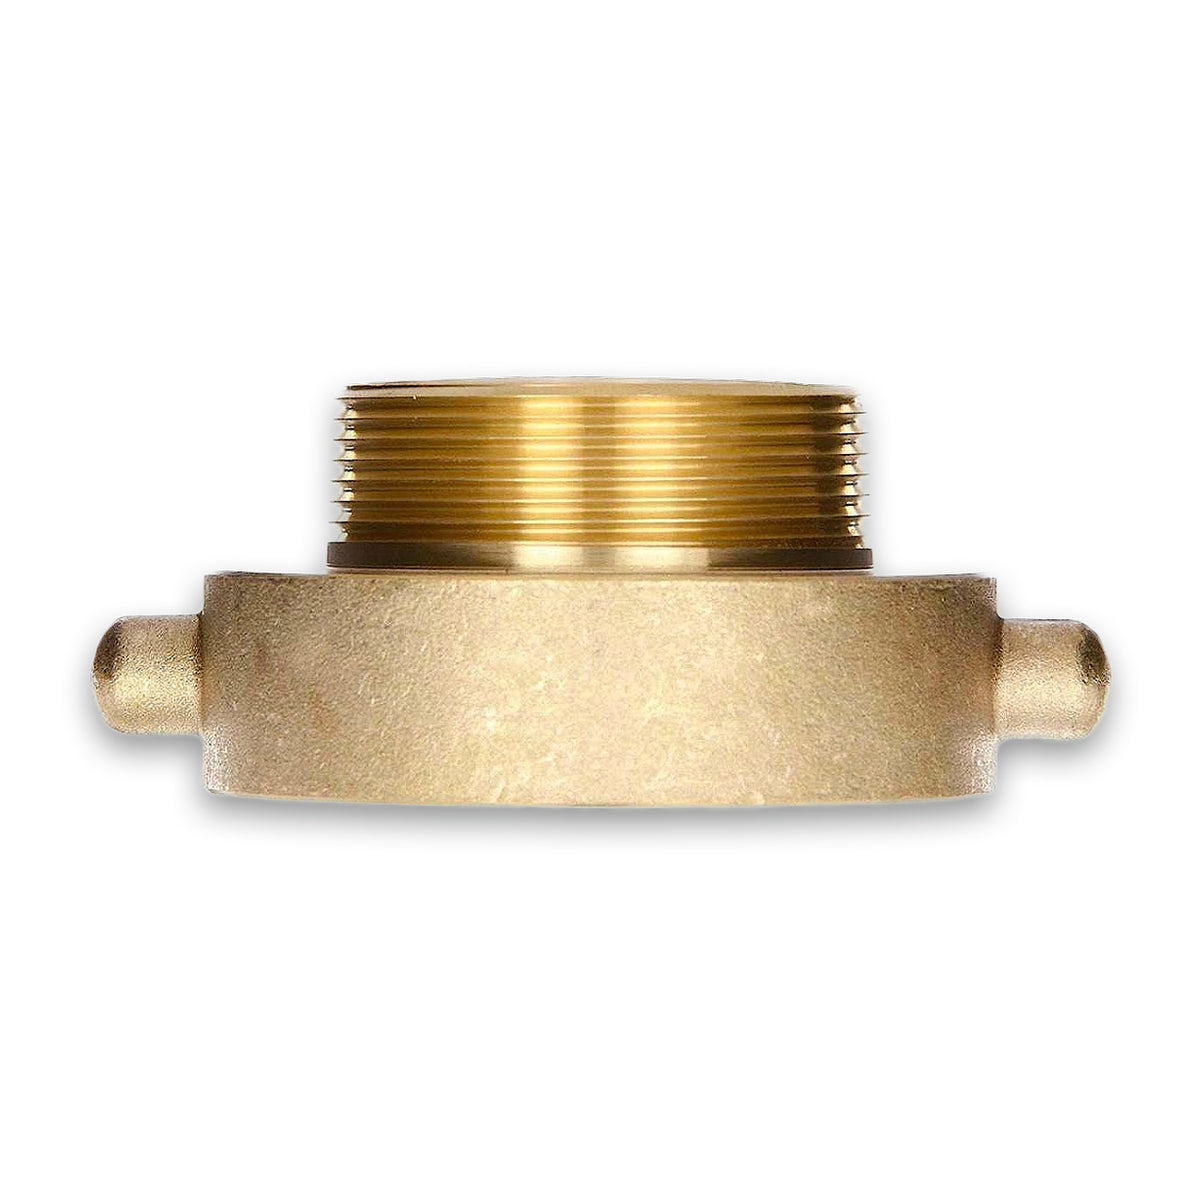 NH Details about   Brass Fire Hydrant Adapter With Pin Lug Equipment 1-1/2" NST Female X 3/4" 